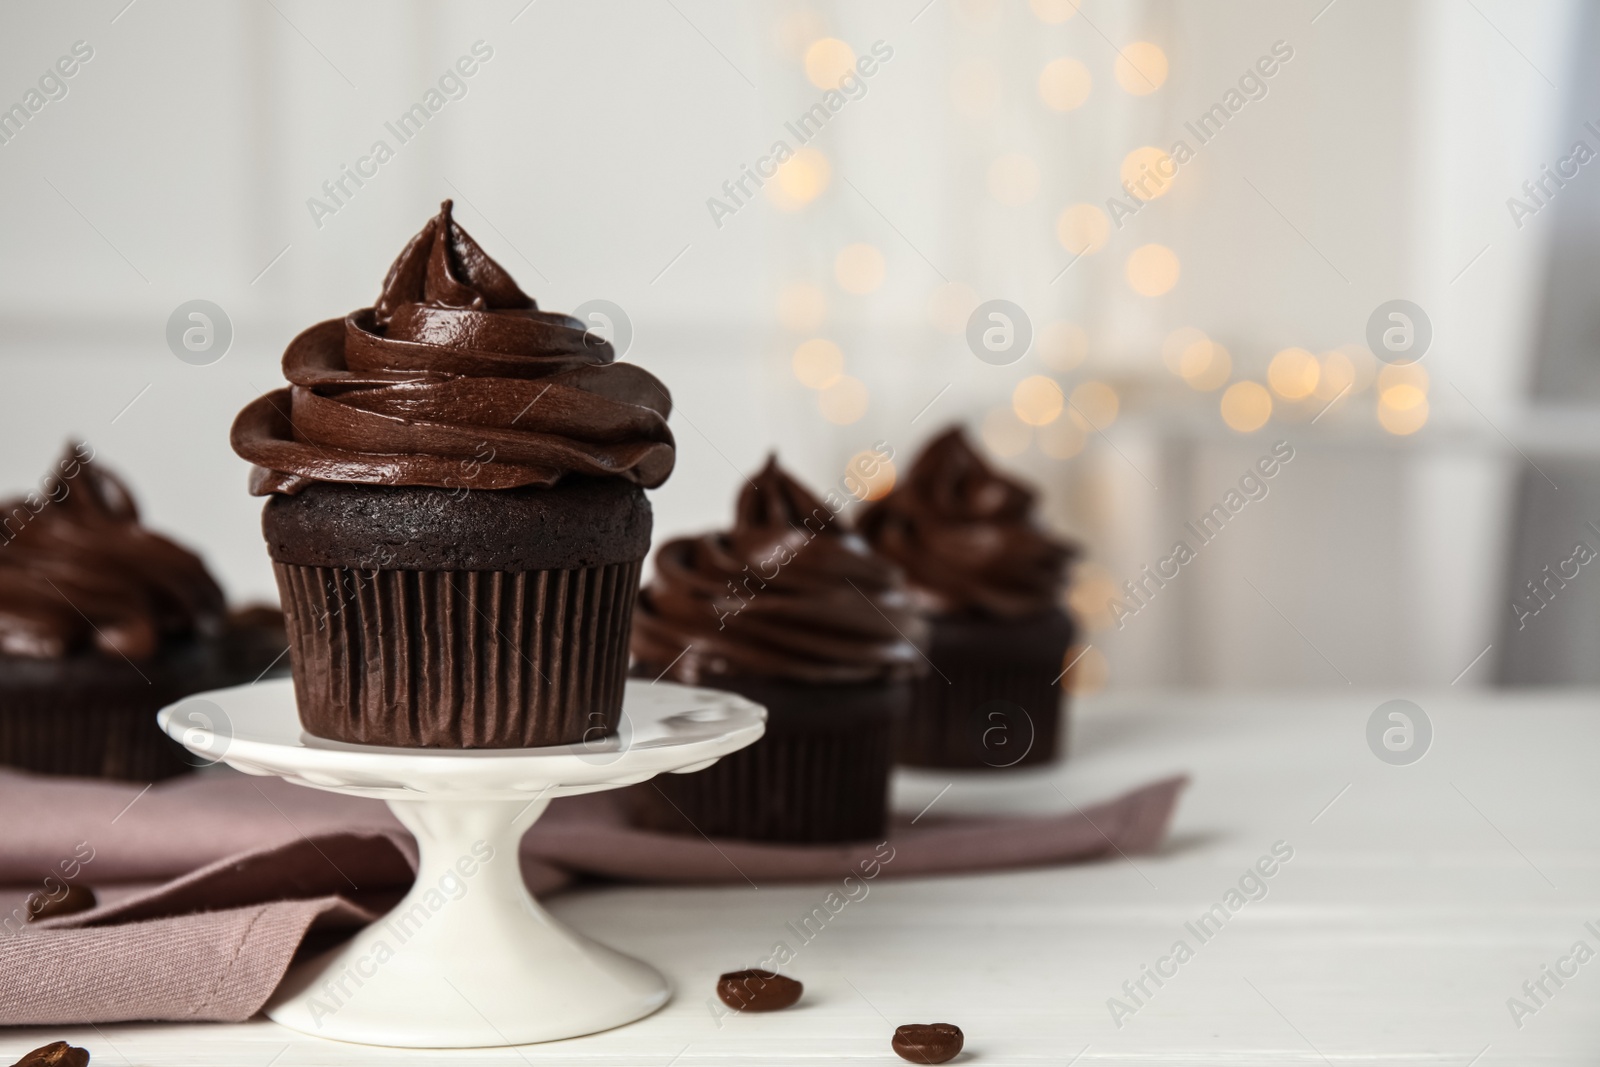 Photo of Dessert stand with delicious chocolate cupcake on white table against blurred lights. Space for text